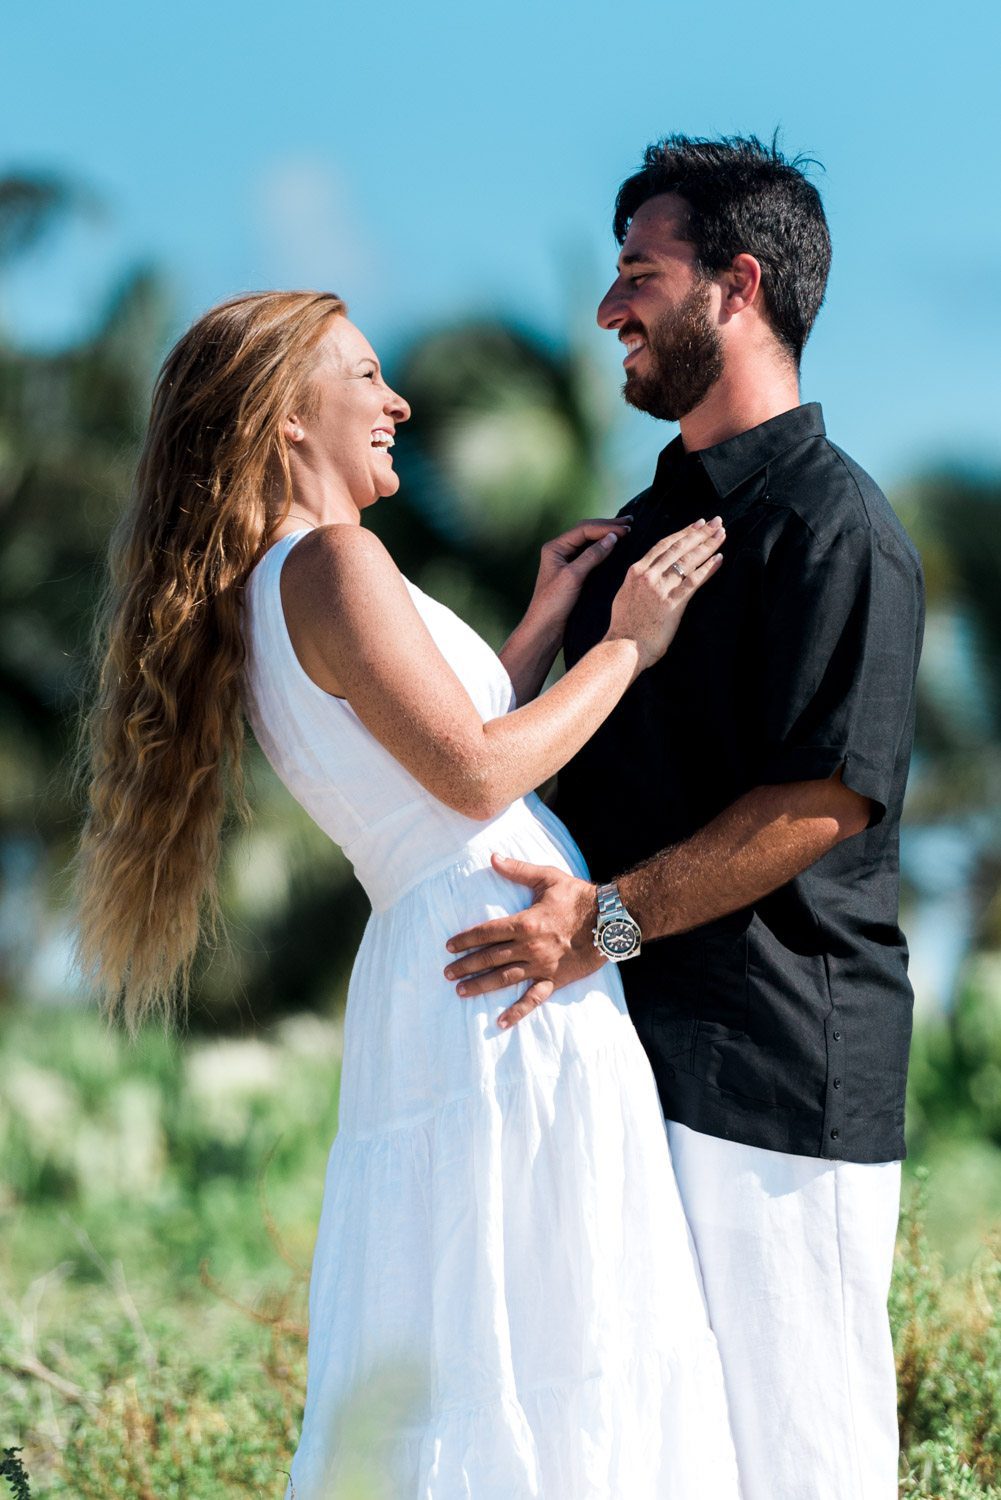 A man and woman are standing in a field together during their destination engagement session.